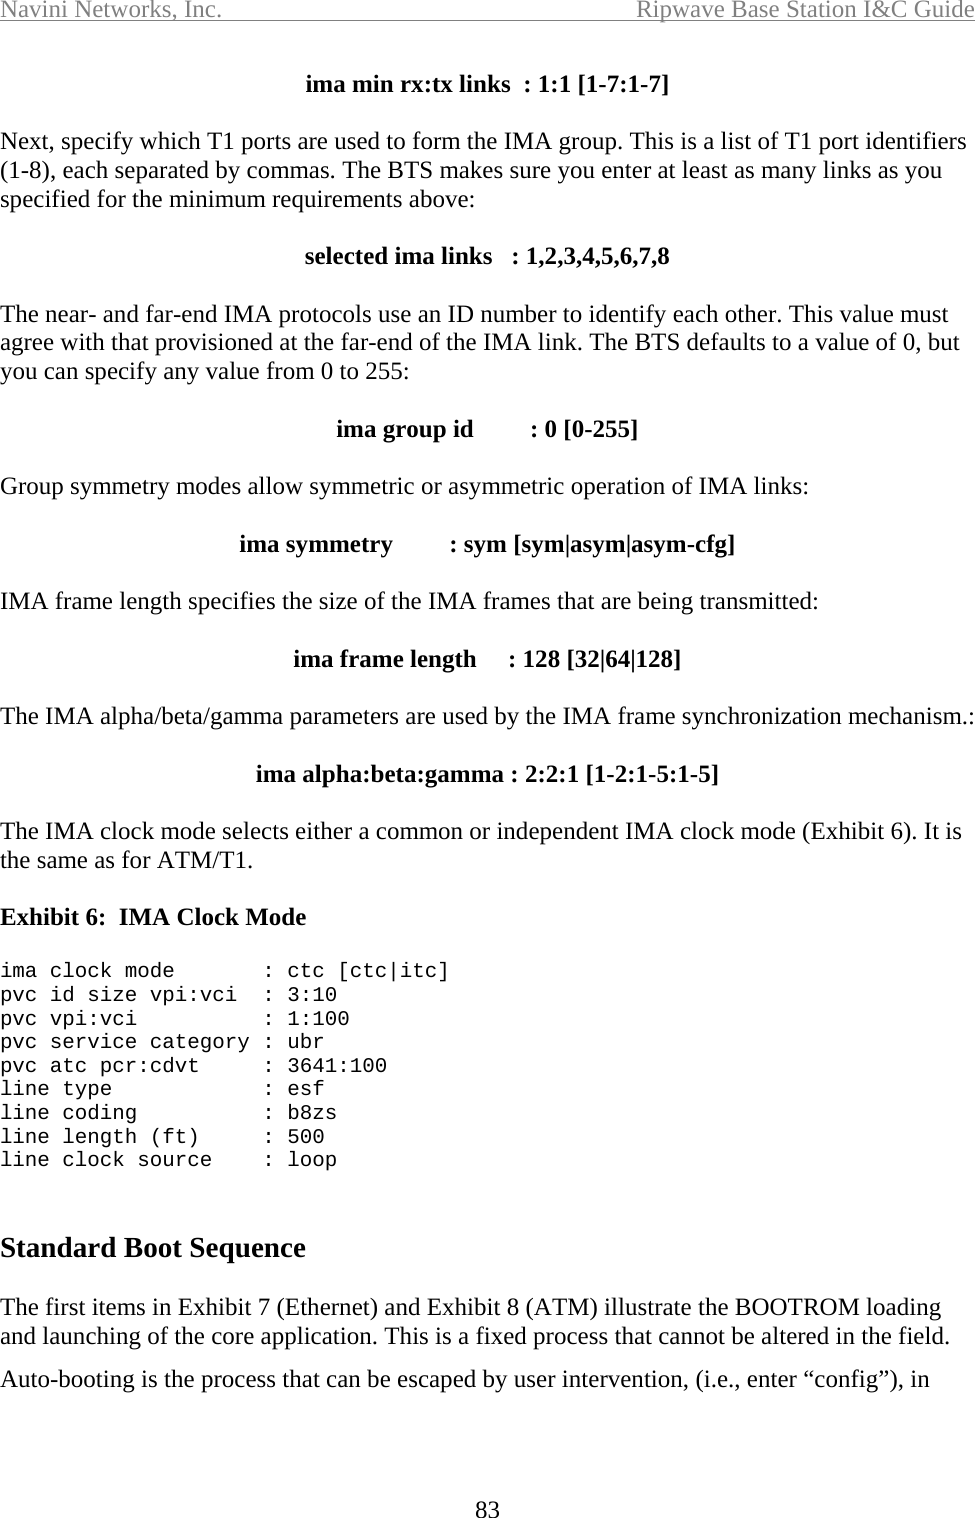 Navini Networks, Inc.  Ripwave Base Station I&amp;C Guide  83 ima min rx:tx links  : 1:1 [1-7:1-7]  Next, specify which T1 ports are used to form the IMA group. This is a list of T1 port identifiers (1-8), each separated by commas. The BTS makes sure you enter at least as many links as you specified for the minimum requirements above:  selected ima links   : 1,2,3,4,5,6,7,8  The near- and far-end IMA protocols use an ID number to identify each other. This value must agree with that provisioned at the far-end of the IMA link. The BTS defaults to a value of 0, but you can specify any value from 0 to 255:  ima group id         : 0 [0-255]  Group symmetry modes allow symmetric or asymmetric operation of IMA links:  ima symmetry         : sym [sym|asym|asym-cfg]  IMA frame length specifies the size of the IMA frames that are being transmitted:  ima frame length     : 128 [32|64|128]  The IMA alpha/beta/gamma parameters are used by the IMA frame synchronization mechanism.:   ima alpha:beta:gamma : 2:2:1 [1-2:1-5:1-5]  The IMA clock mode selects either a common or independent IMA clock mode (Exhibit 6). It is the same as for ATM/T1.  Exhibit 6:  IMA Clock Mode    ima clock mode       : ctc [ctc|itc] pvc id size vpi:vci  : 3:10 pvc vpi:vci          : 1:100 pvc service category : ubr pvc atc pcr:cdvt     : 3641:100 line type            : esf line coding          : b8zs line length (ft)     : 500 line clock source    : loop   Standard Boot Sequence  The first items in Exhibit 7 (Ethernet) and Exhibit 8 (ATM) illustrate the BOOTROM loading and launching of the core application. This is a fixed process that cannot be altered in the field.  Auto-booting is the process that can be escaped by user intervention, (i.e., enter “config”), in 